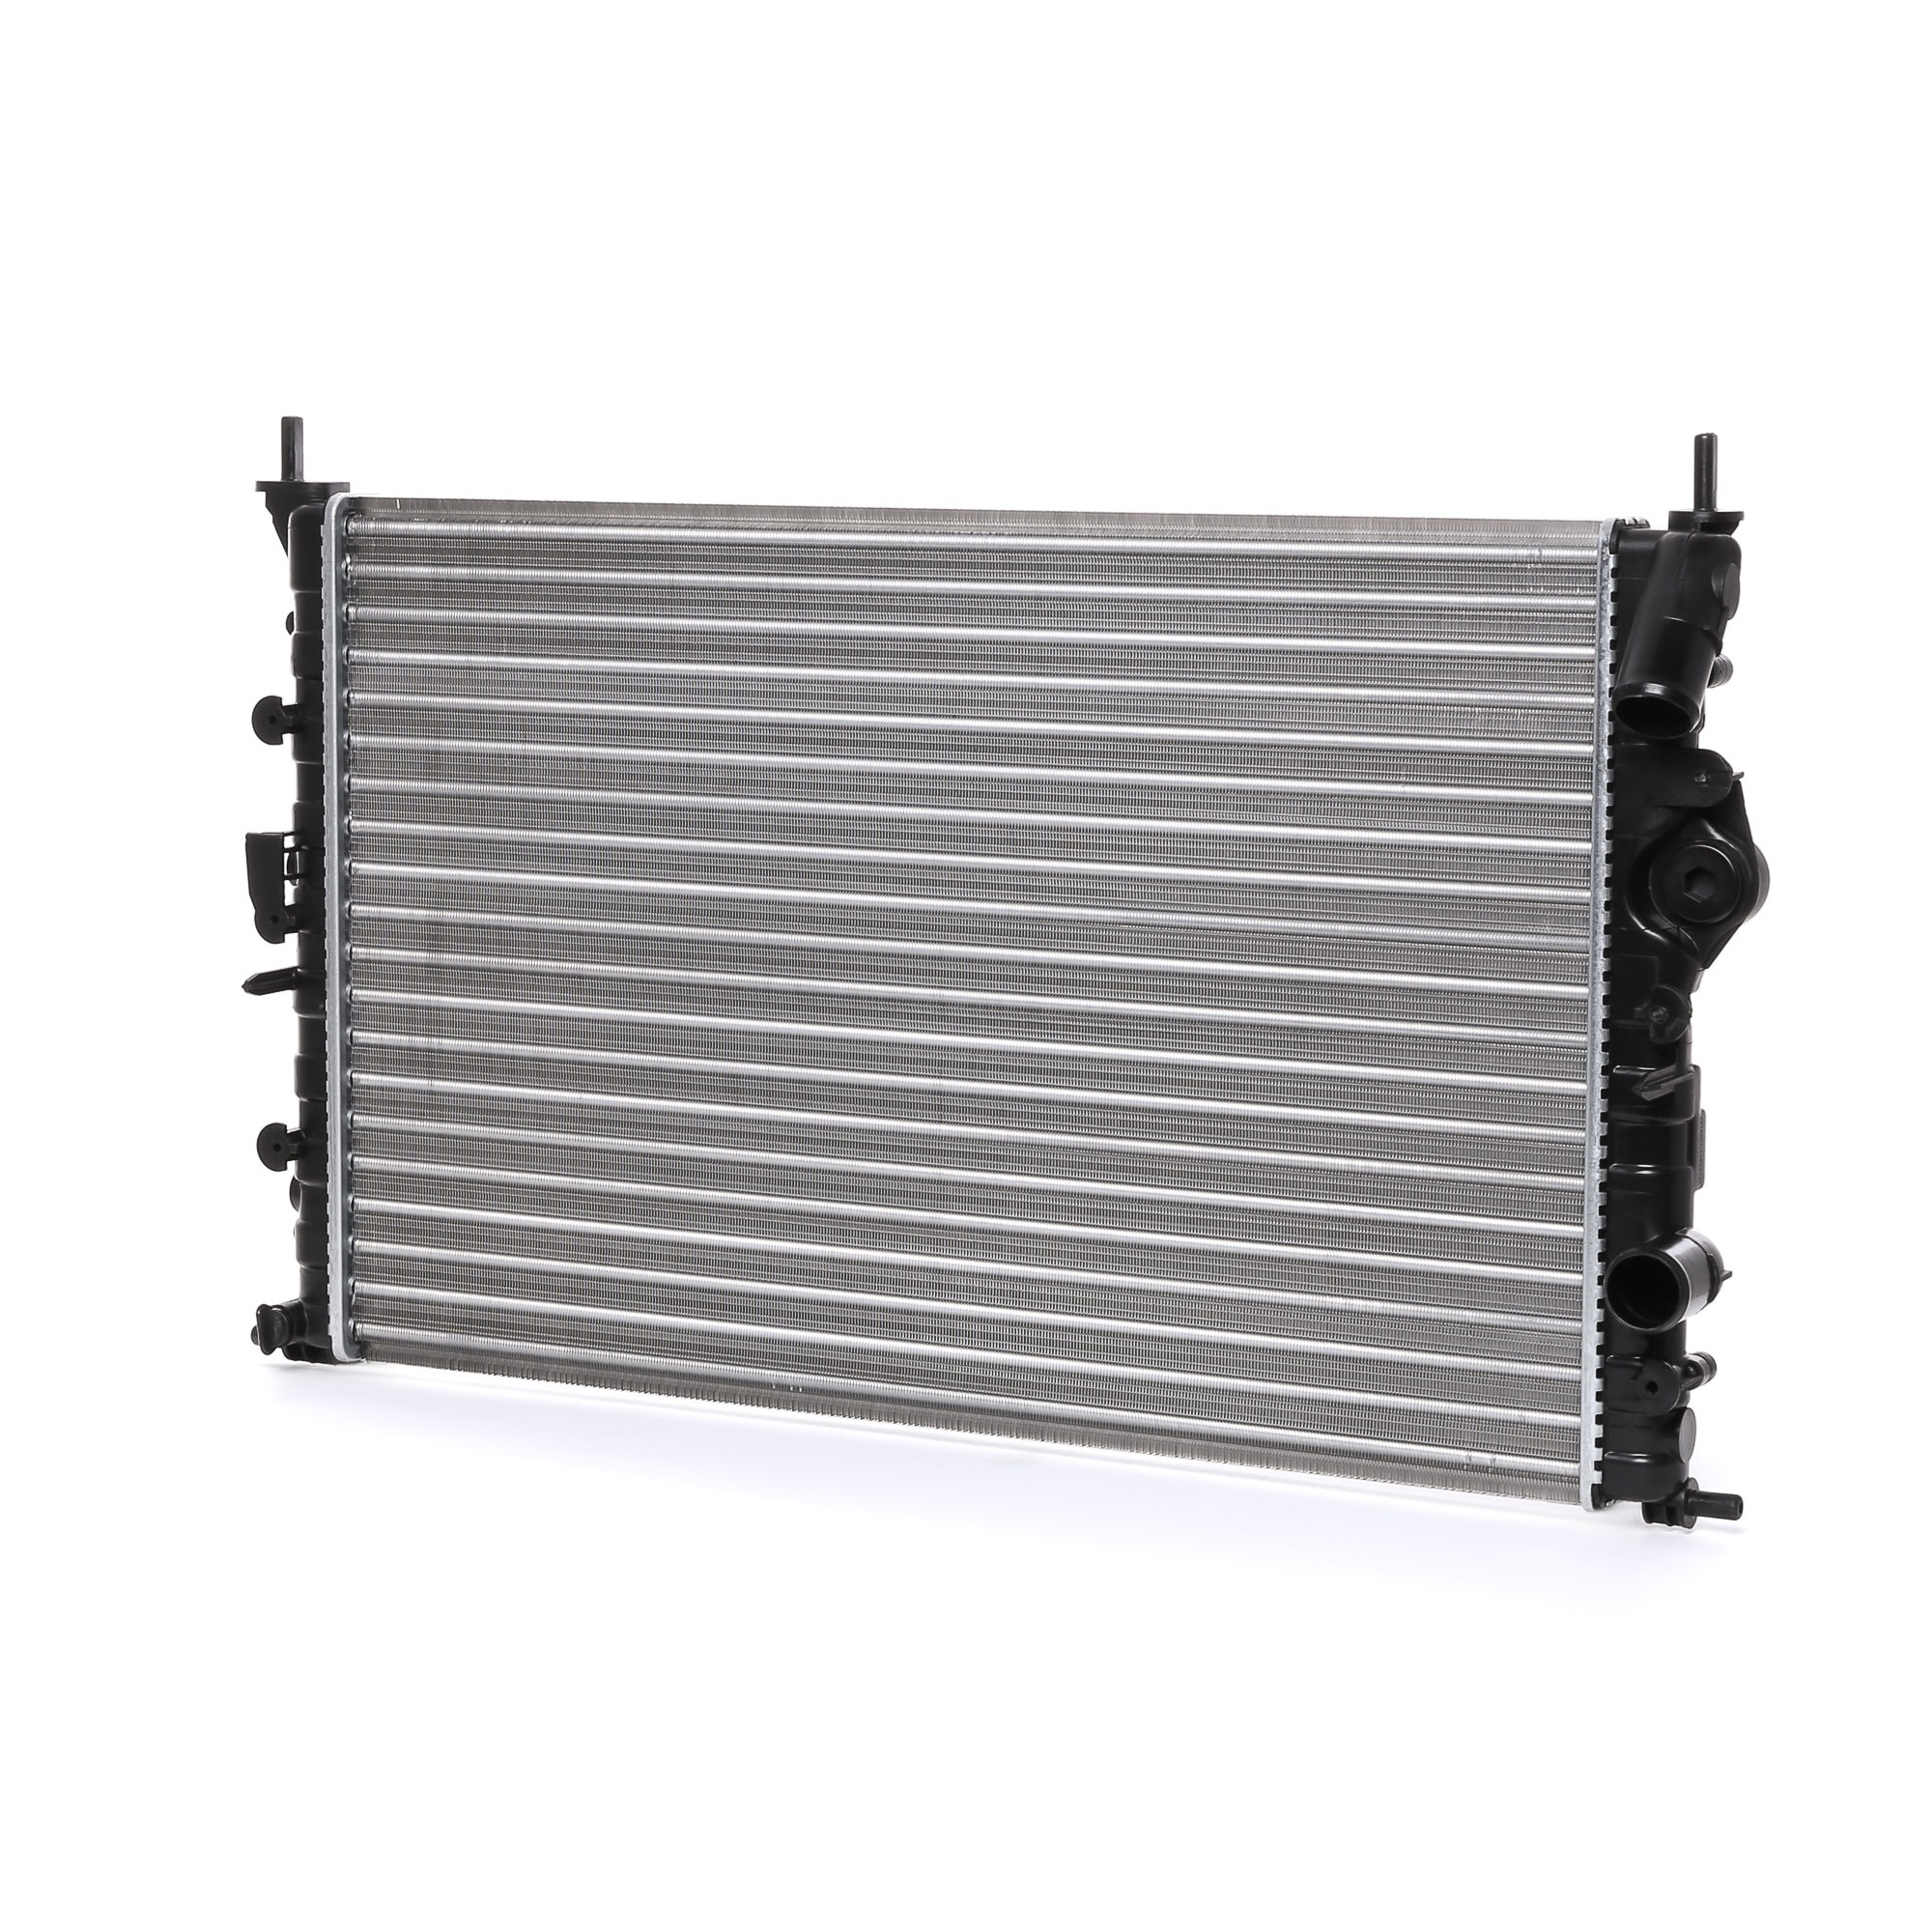 RIDEX Aluminium, 570 x 378 x 23 mm, Mechanically jointed cooling fins Radiator 470R0529 buy